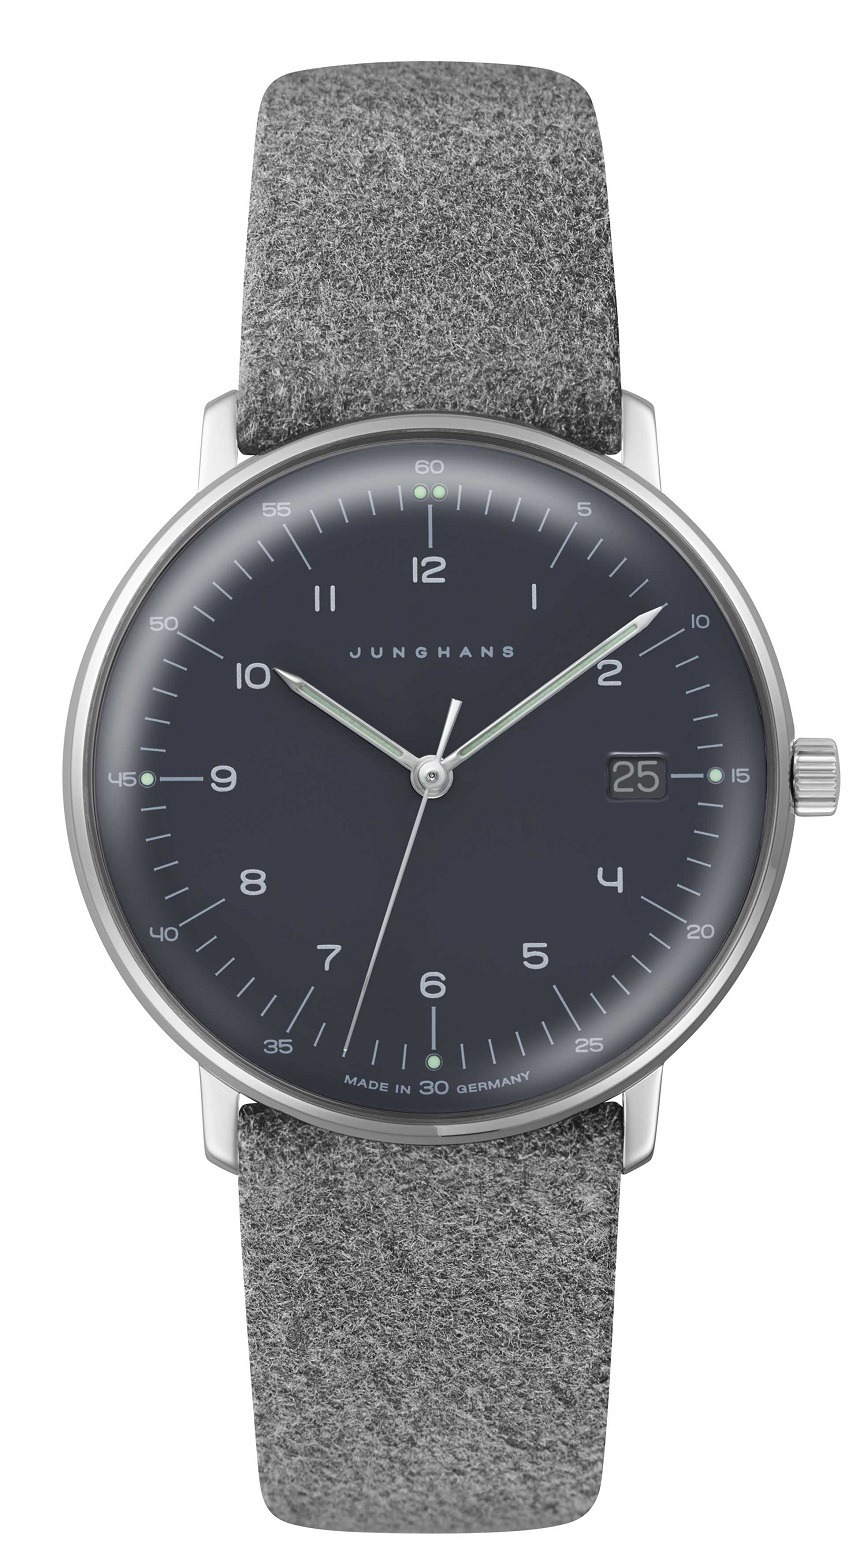 Junghans Max Bill Watch Range Updated For 2015 Watch Releases 